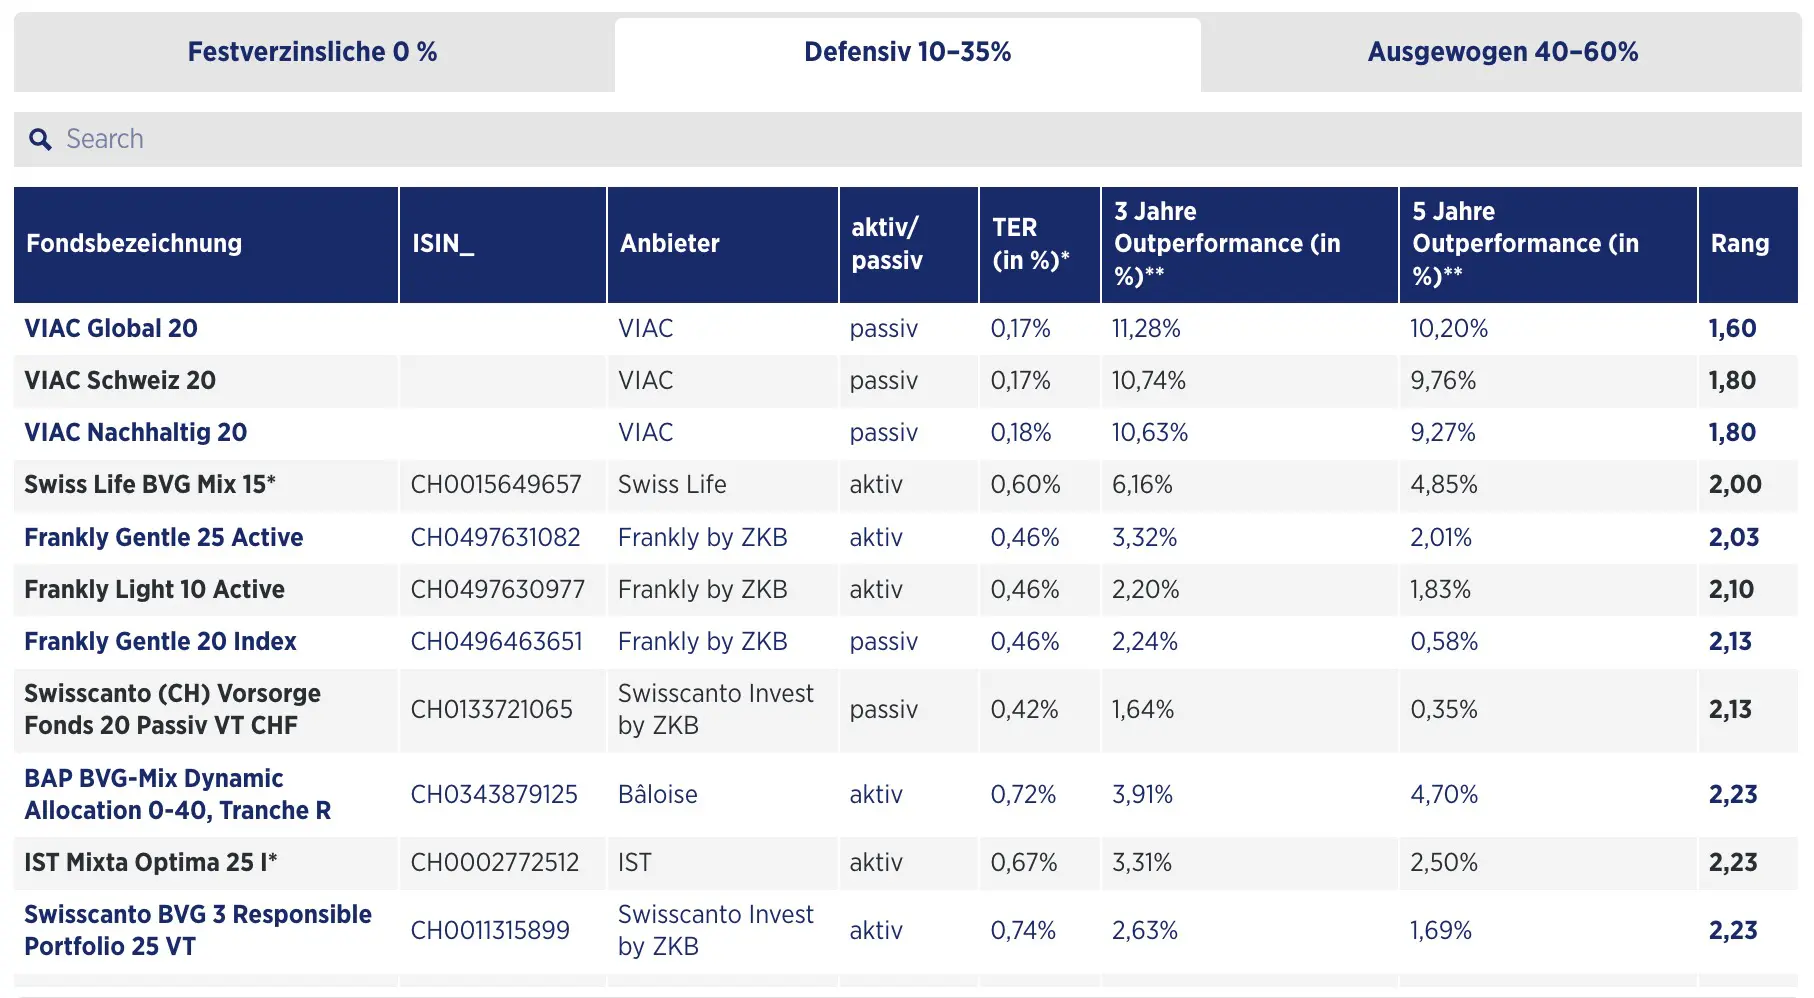 Handelszeitung comparison of the best 3a funds with a defensive profile of 10-35% in stocks (source: Handelszeitung)